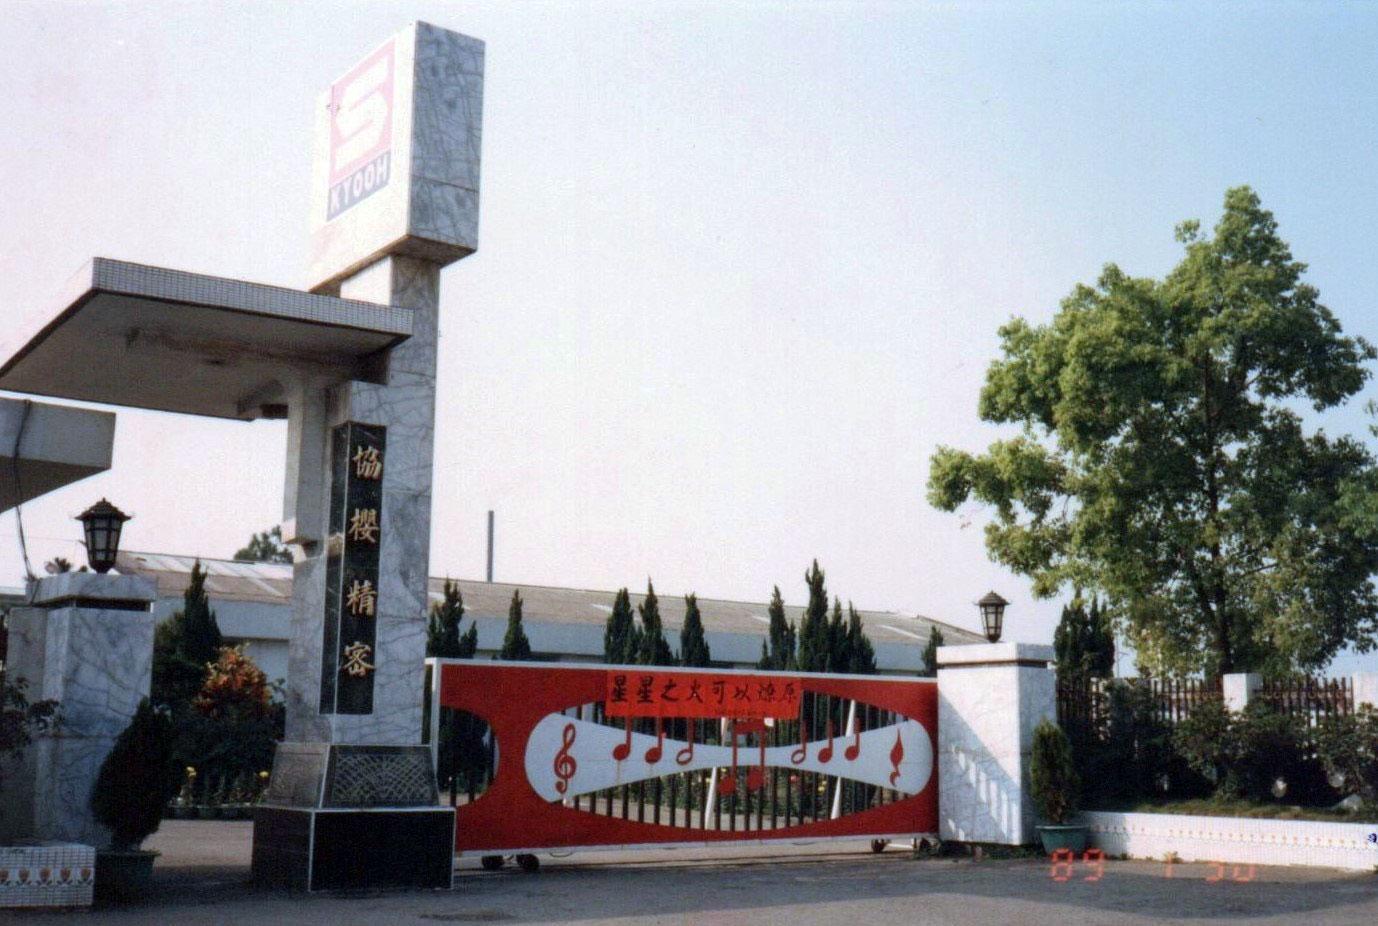 This photo shows the old gate of Kyooh Precision Industry Co. Ltd., which was founded in Taichung, Taiwan, with the sponsorship from Sankyo, the well-known music box brand in Japan.